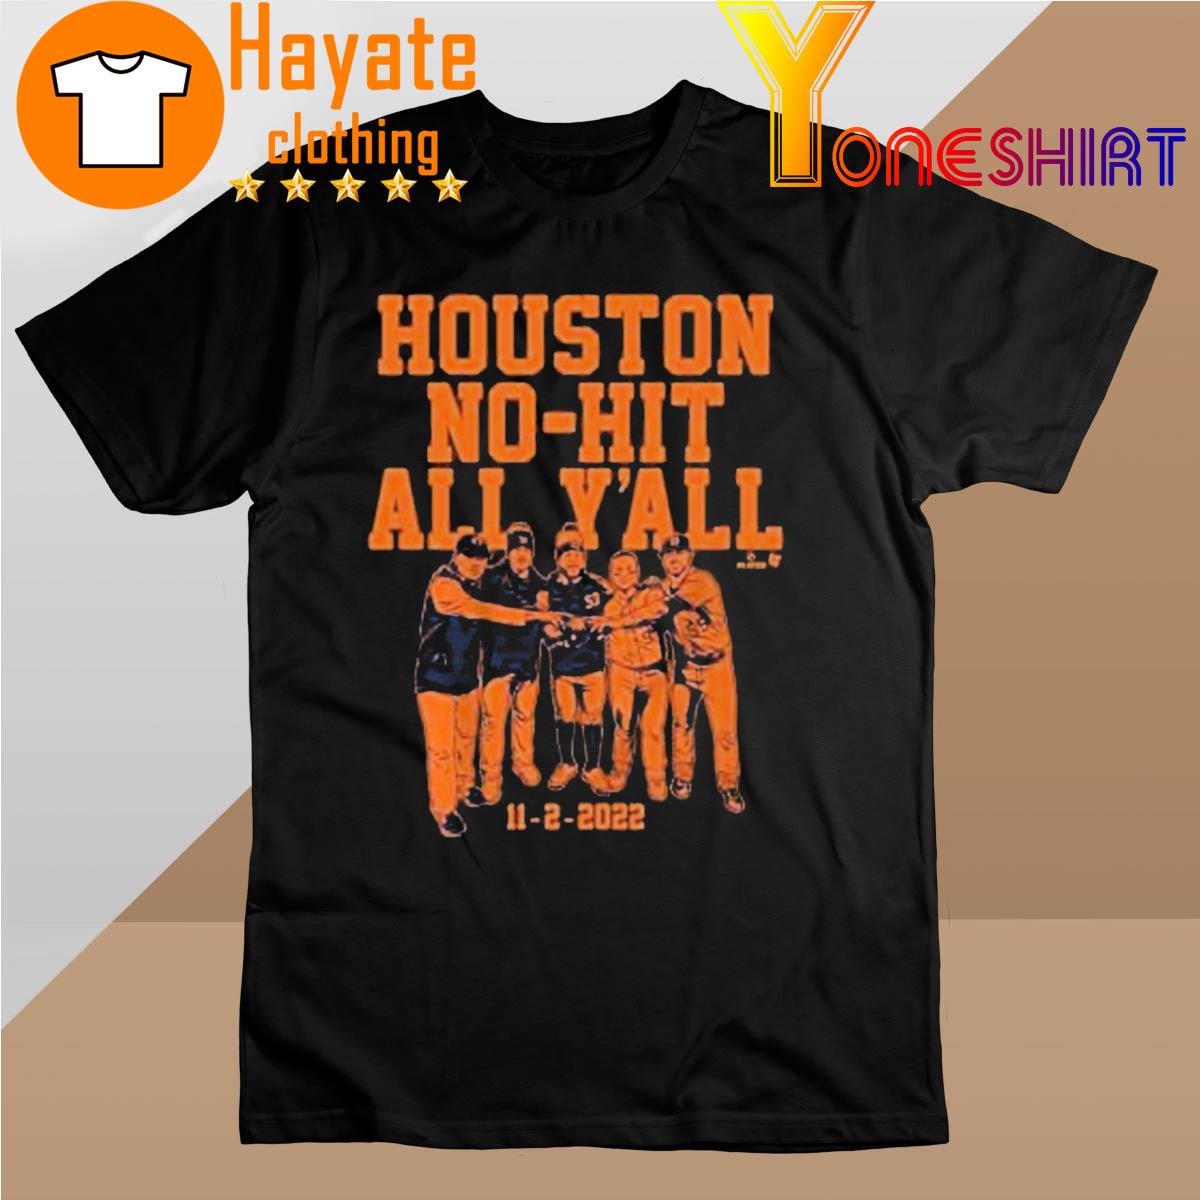 Houston No-Hit All Y’all Tee Shirt